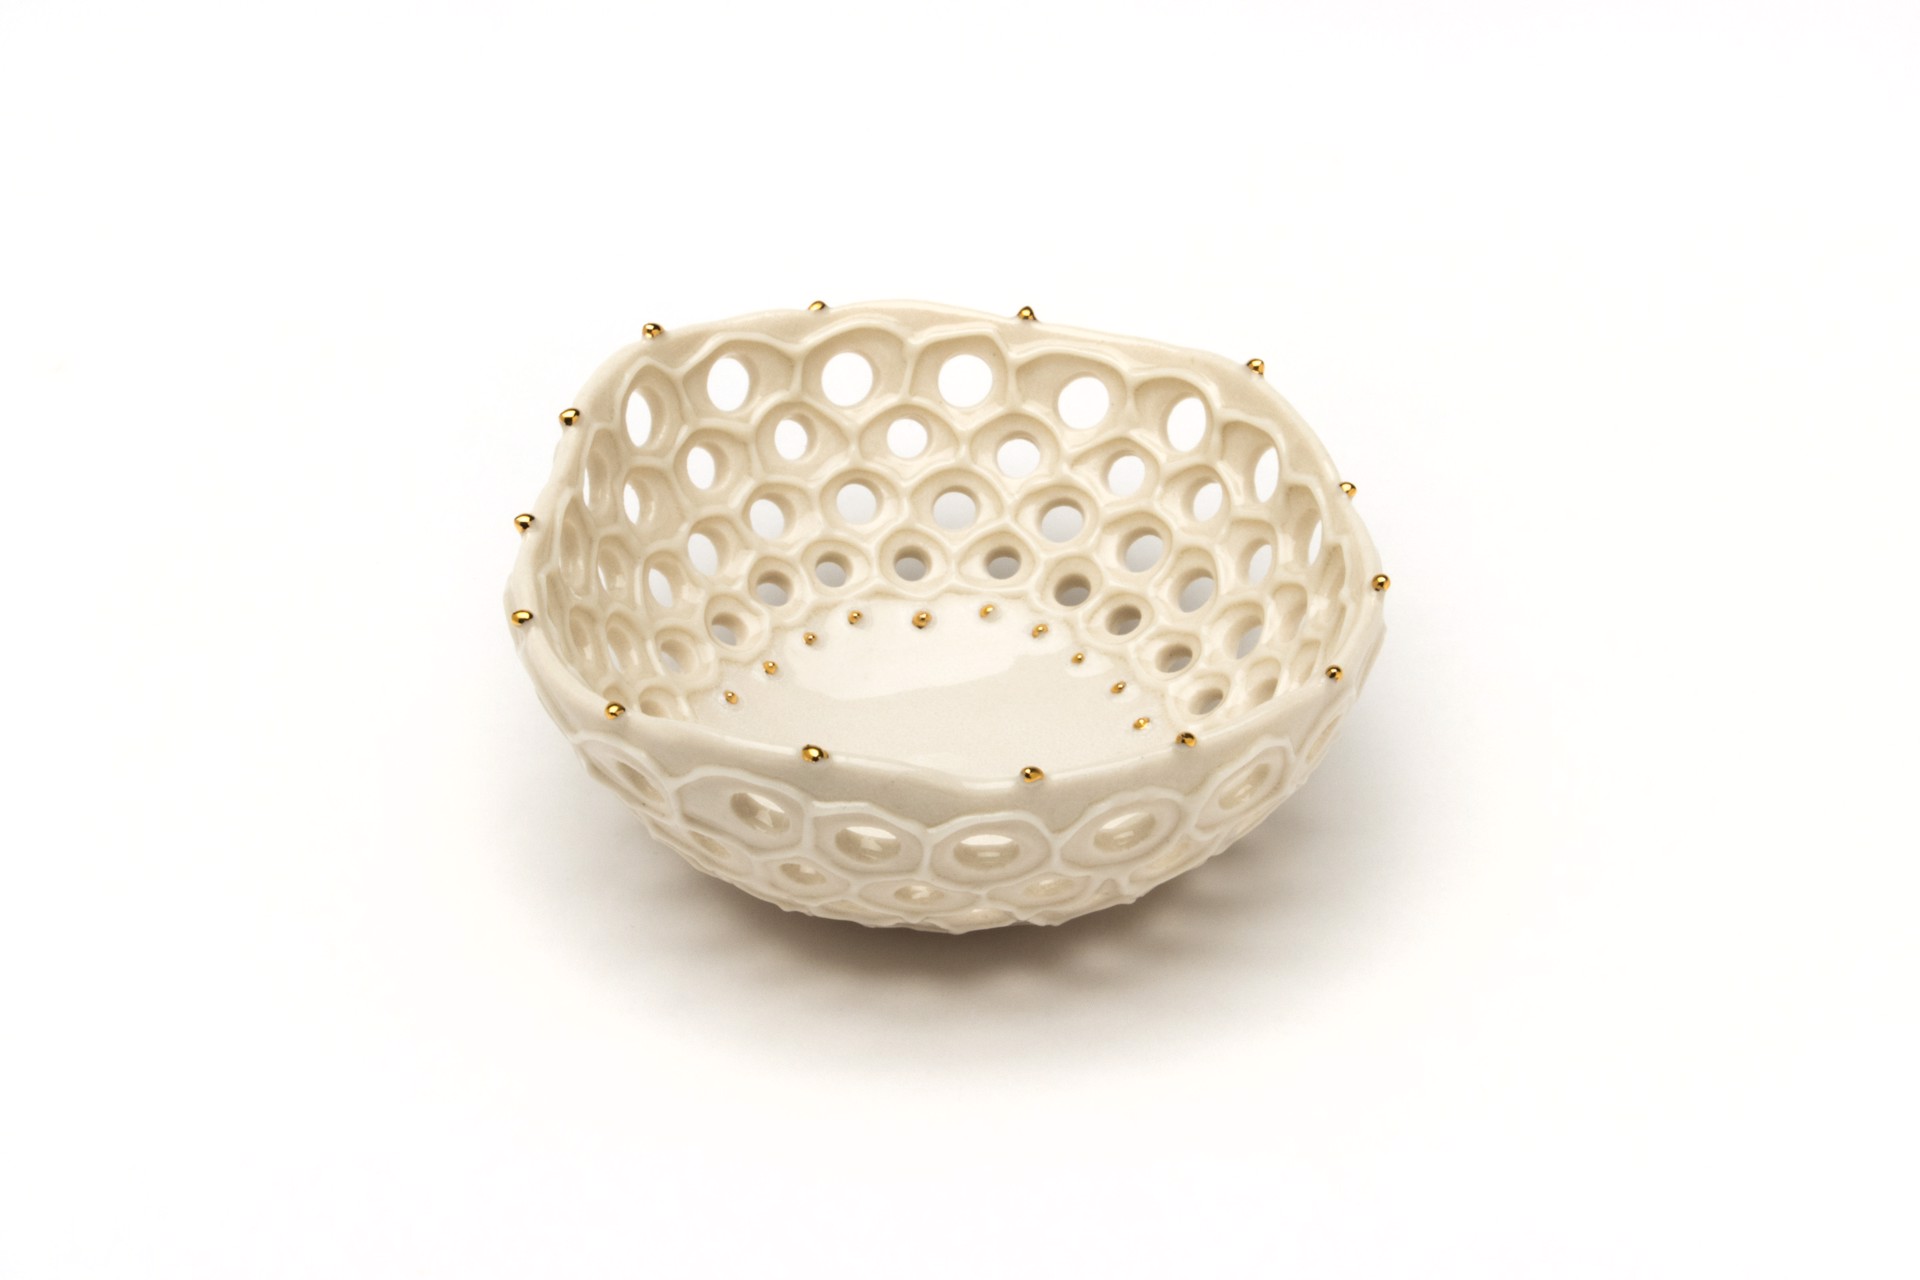 X-Small White & Gold Lacy Bowl by Maria Bruckman